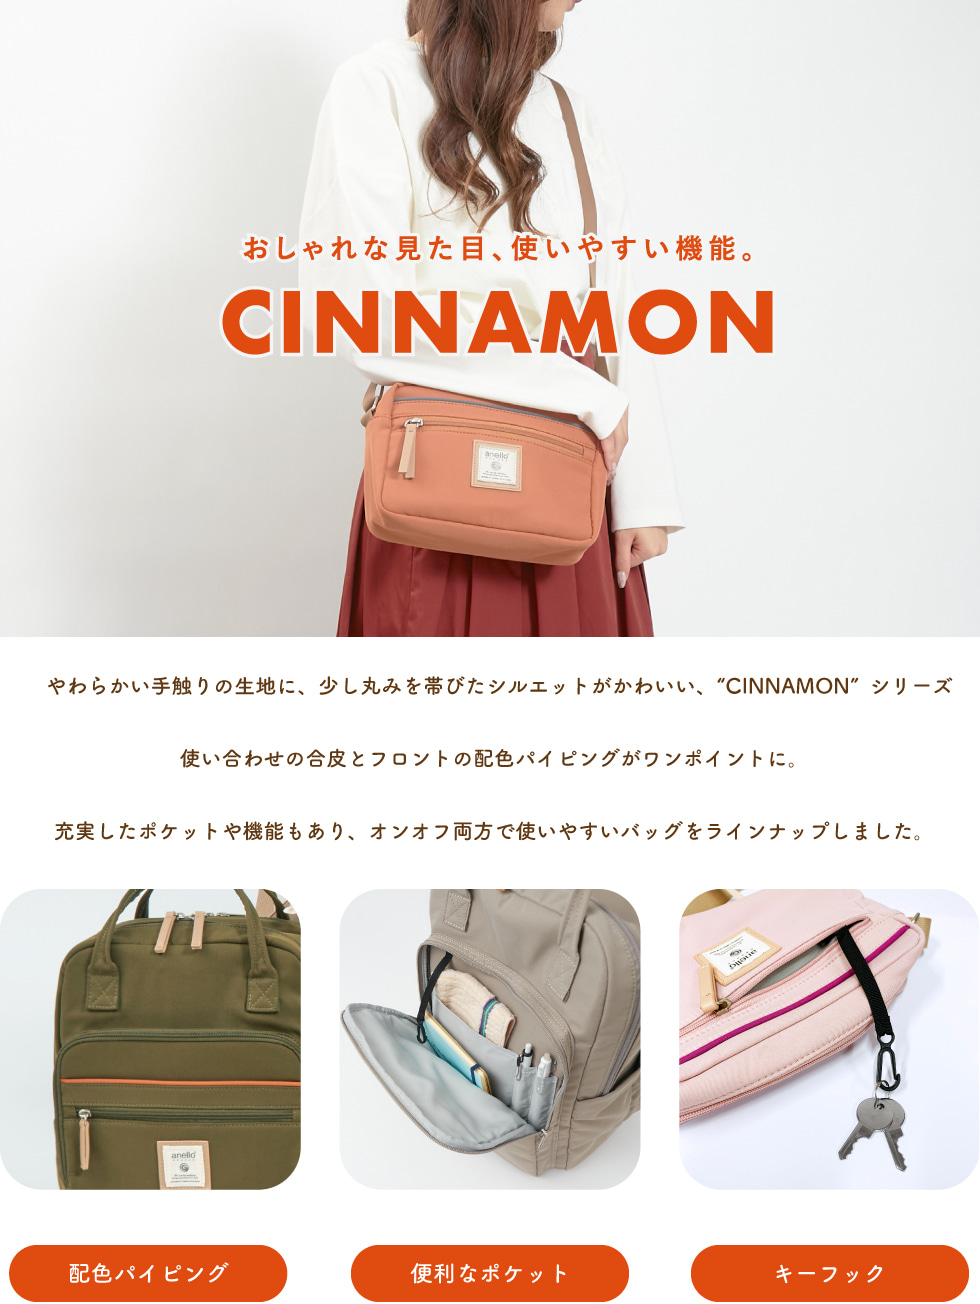 CINNAMON | Carrot Company Official Online Store